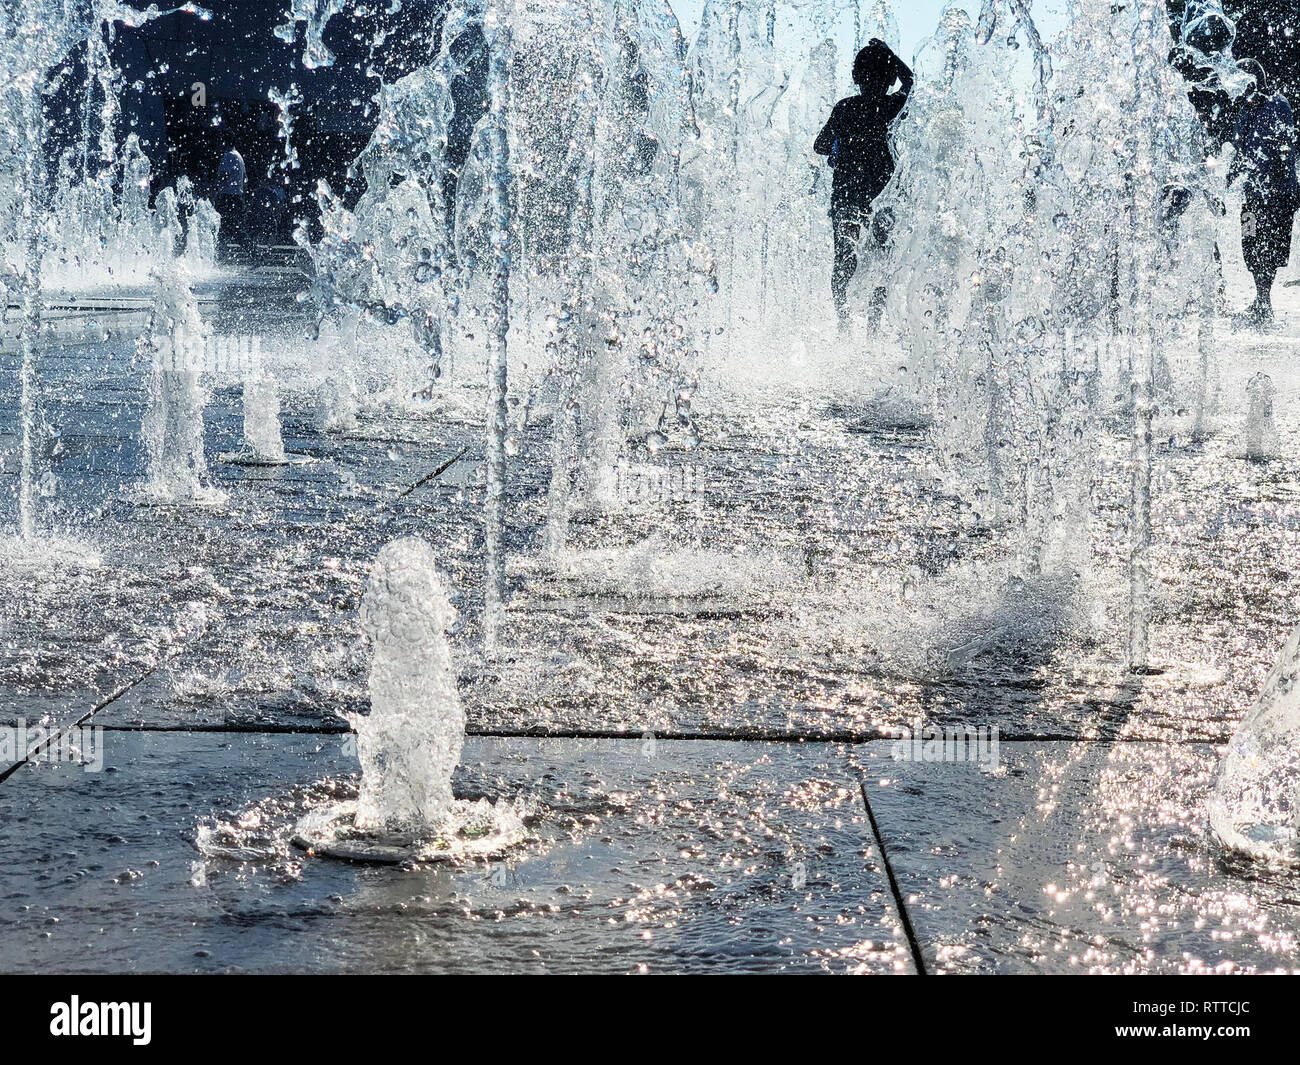 Child Is Playing In Dry Fountain On Hot Sunny Day Stock Photo